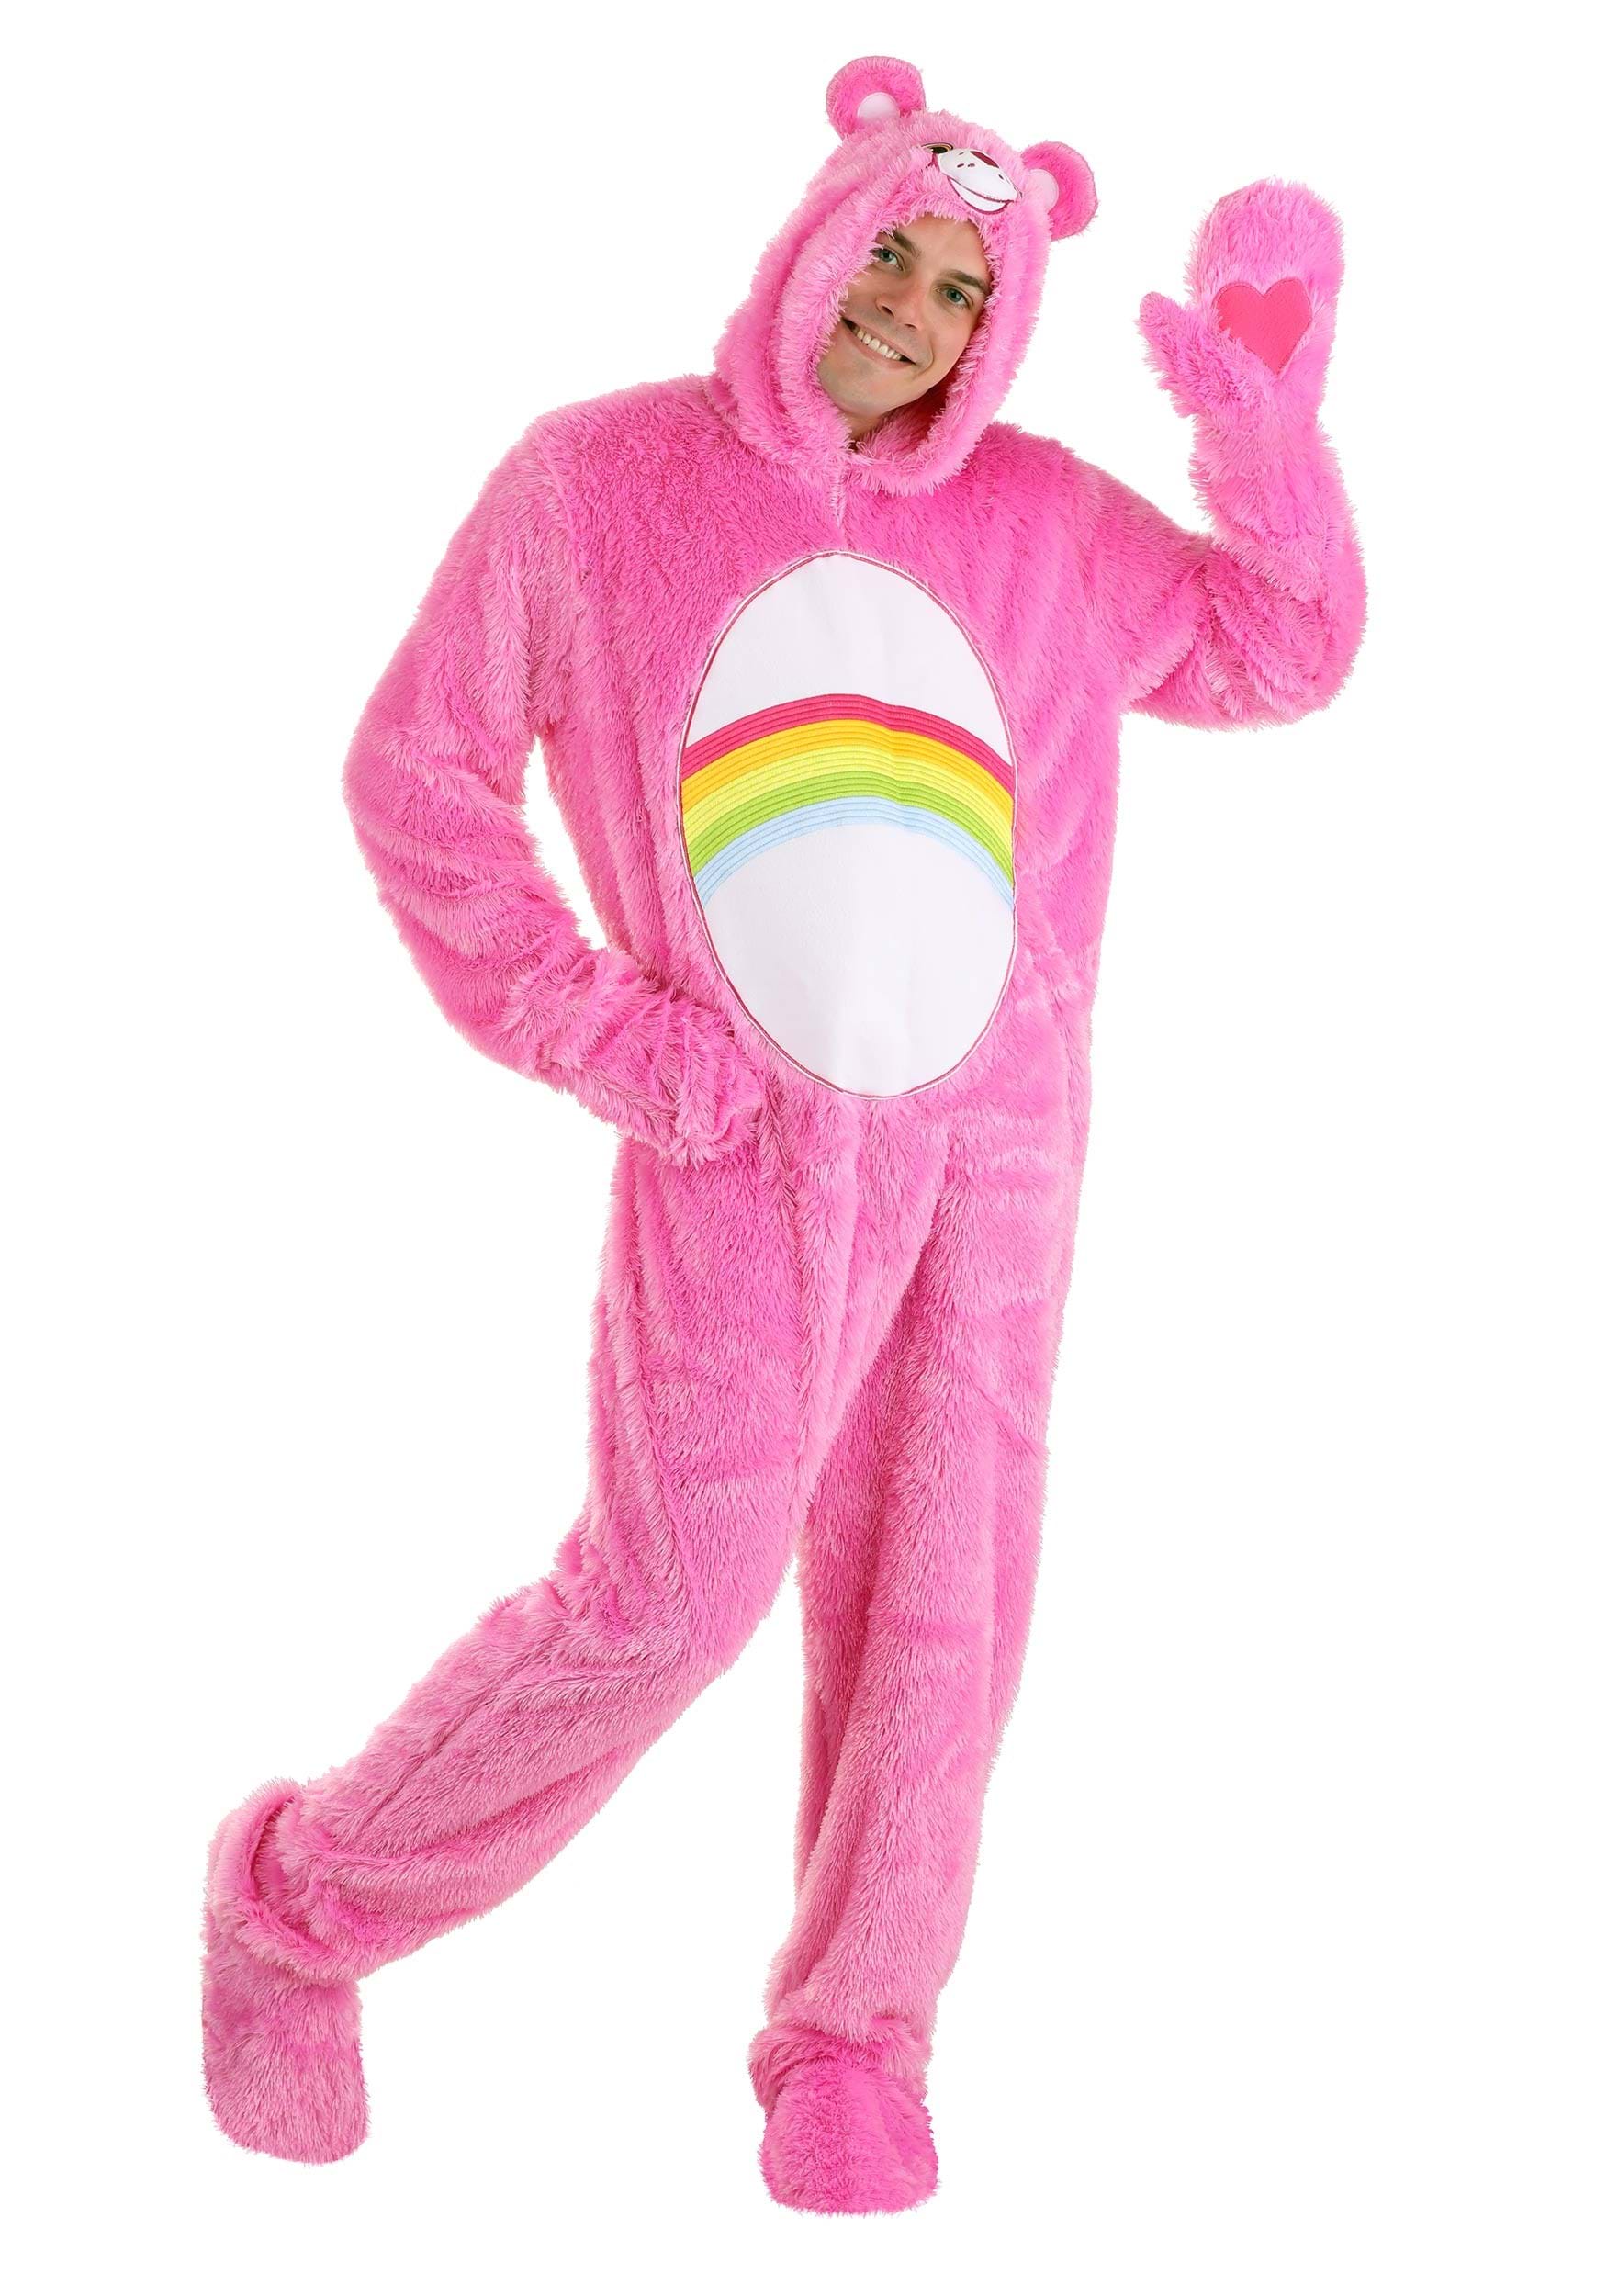 Men’s 80s and 90s Costumes Care Bears Adult Classic Cheer Bear Costume $54.99 AT vintagedancer.com